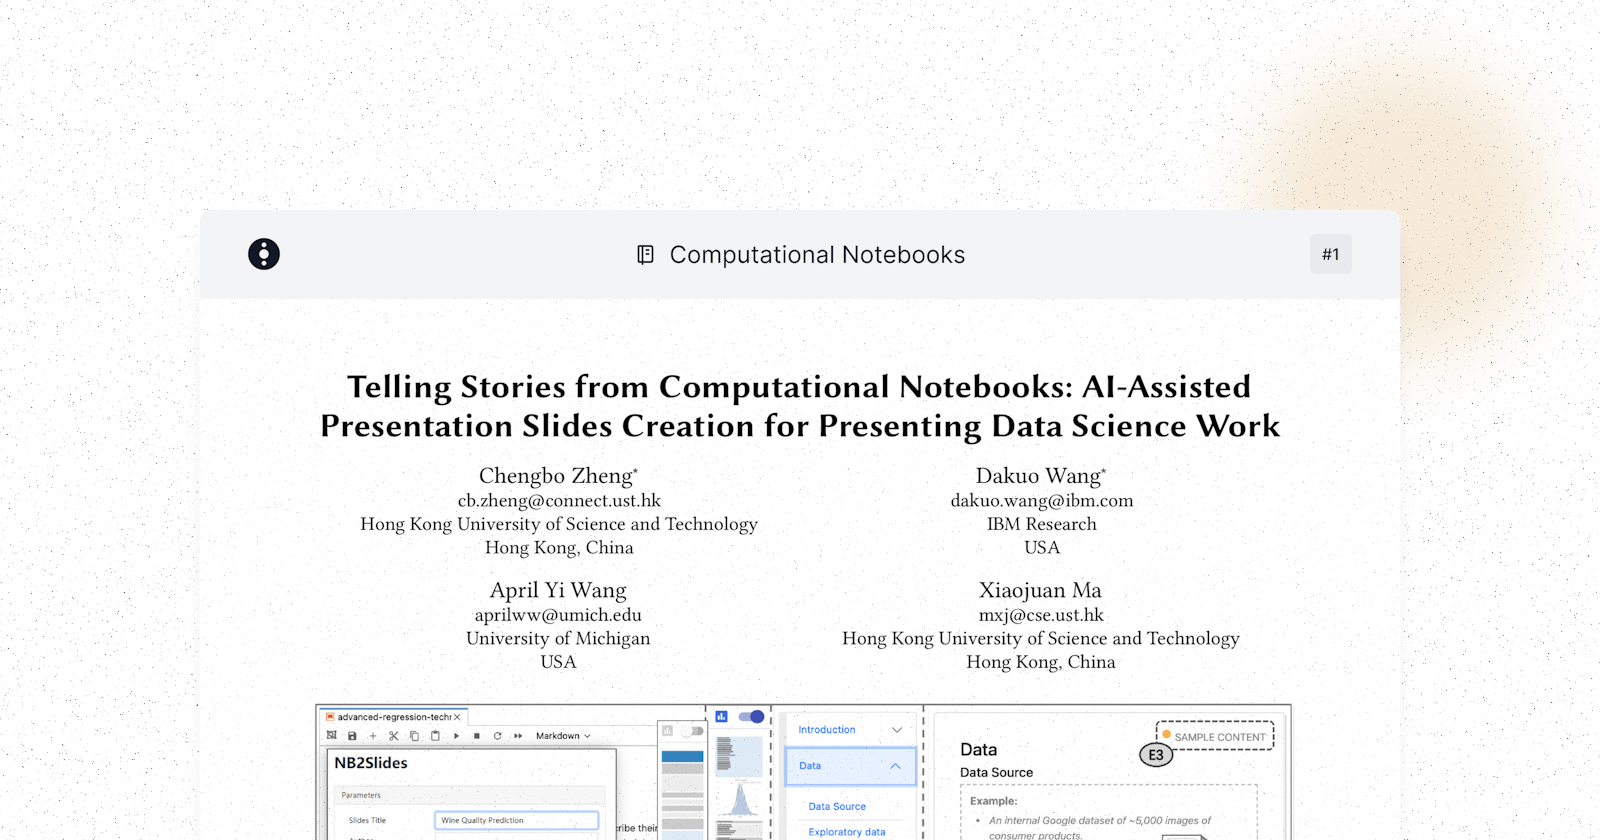 Telling Stories from Computational Notebooks: AI-Assisted Presentation Slides Creation for Presenting Data Science Work